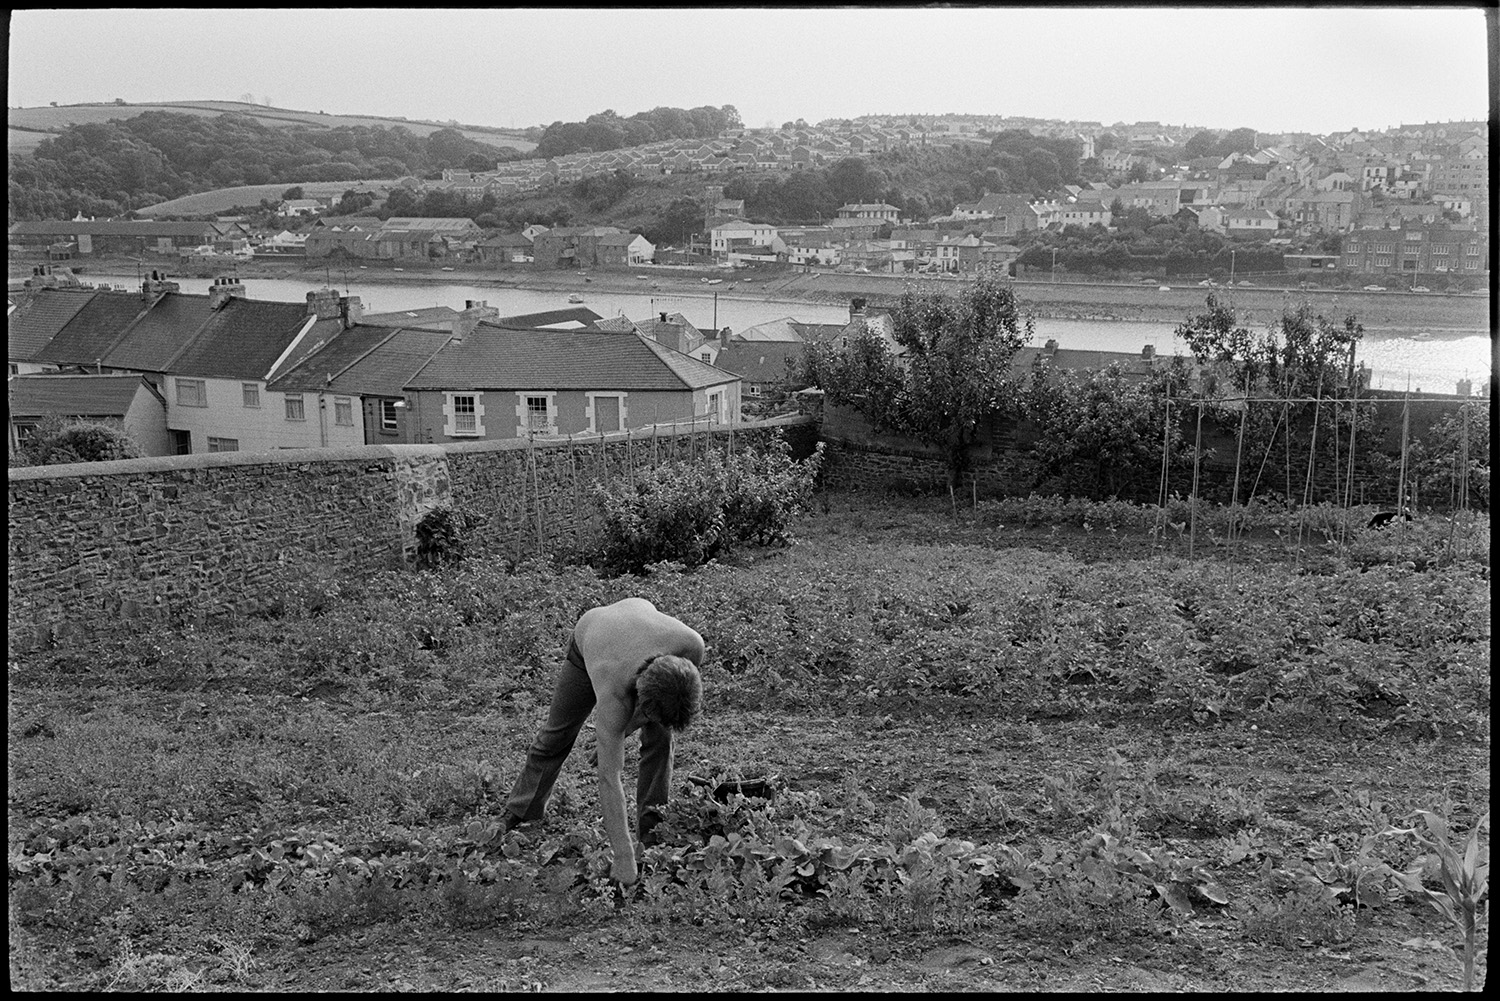 Man working, vegetable garden, river behind. 
[A man digging or weeding in a vegetable garden at East the Water, Bideford. The River Torridge and house son the opposite side of the river can be seen in the background.]